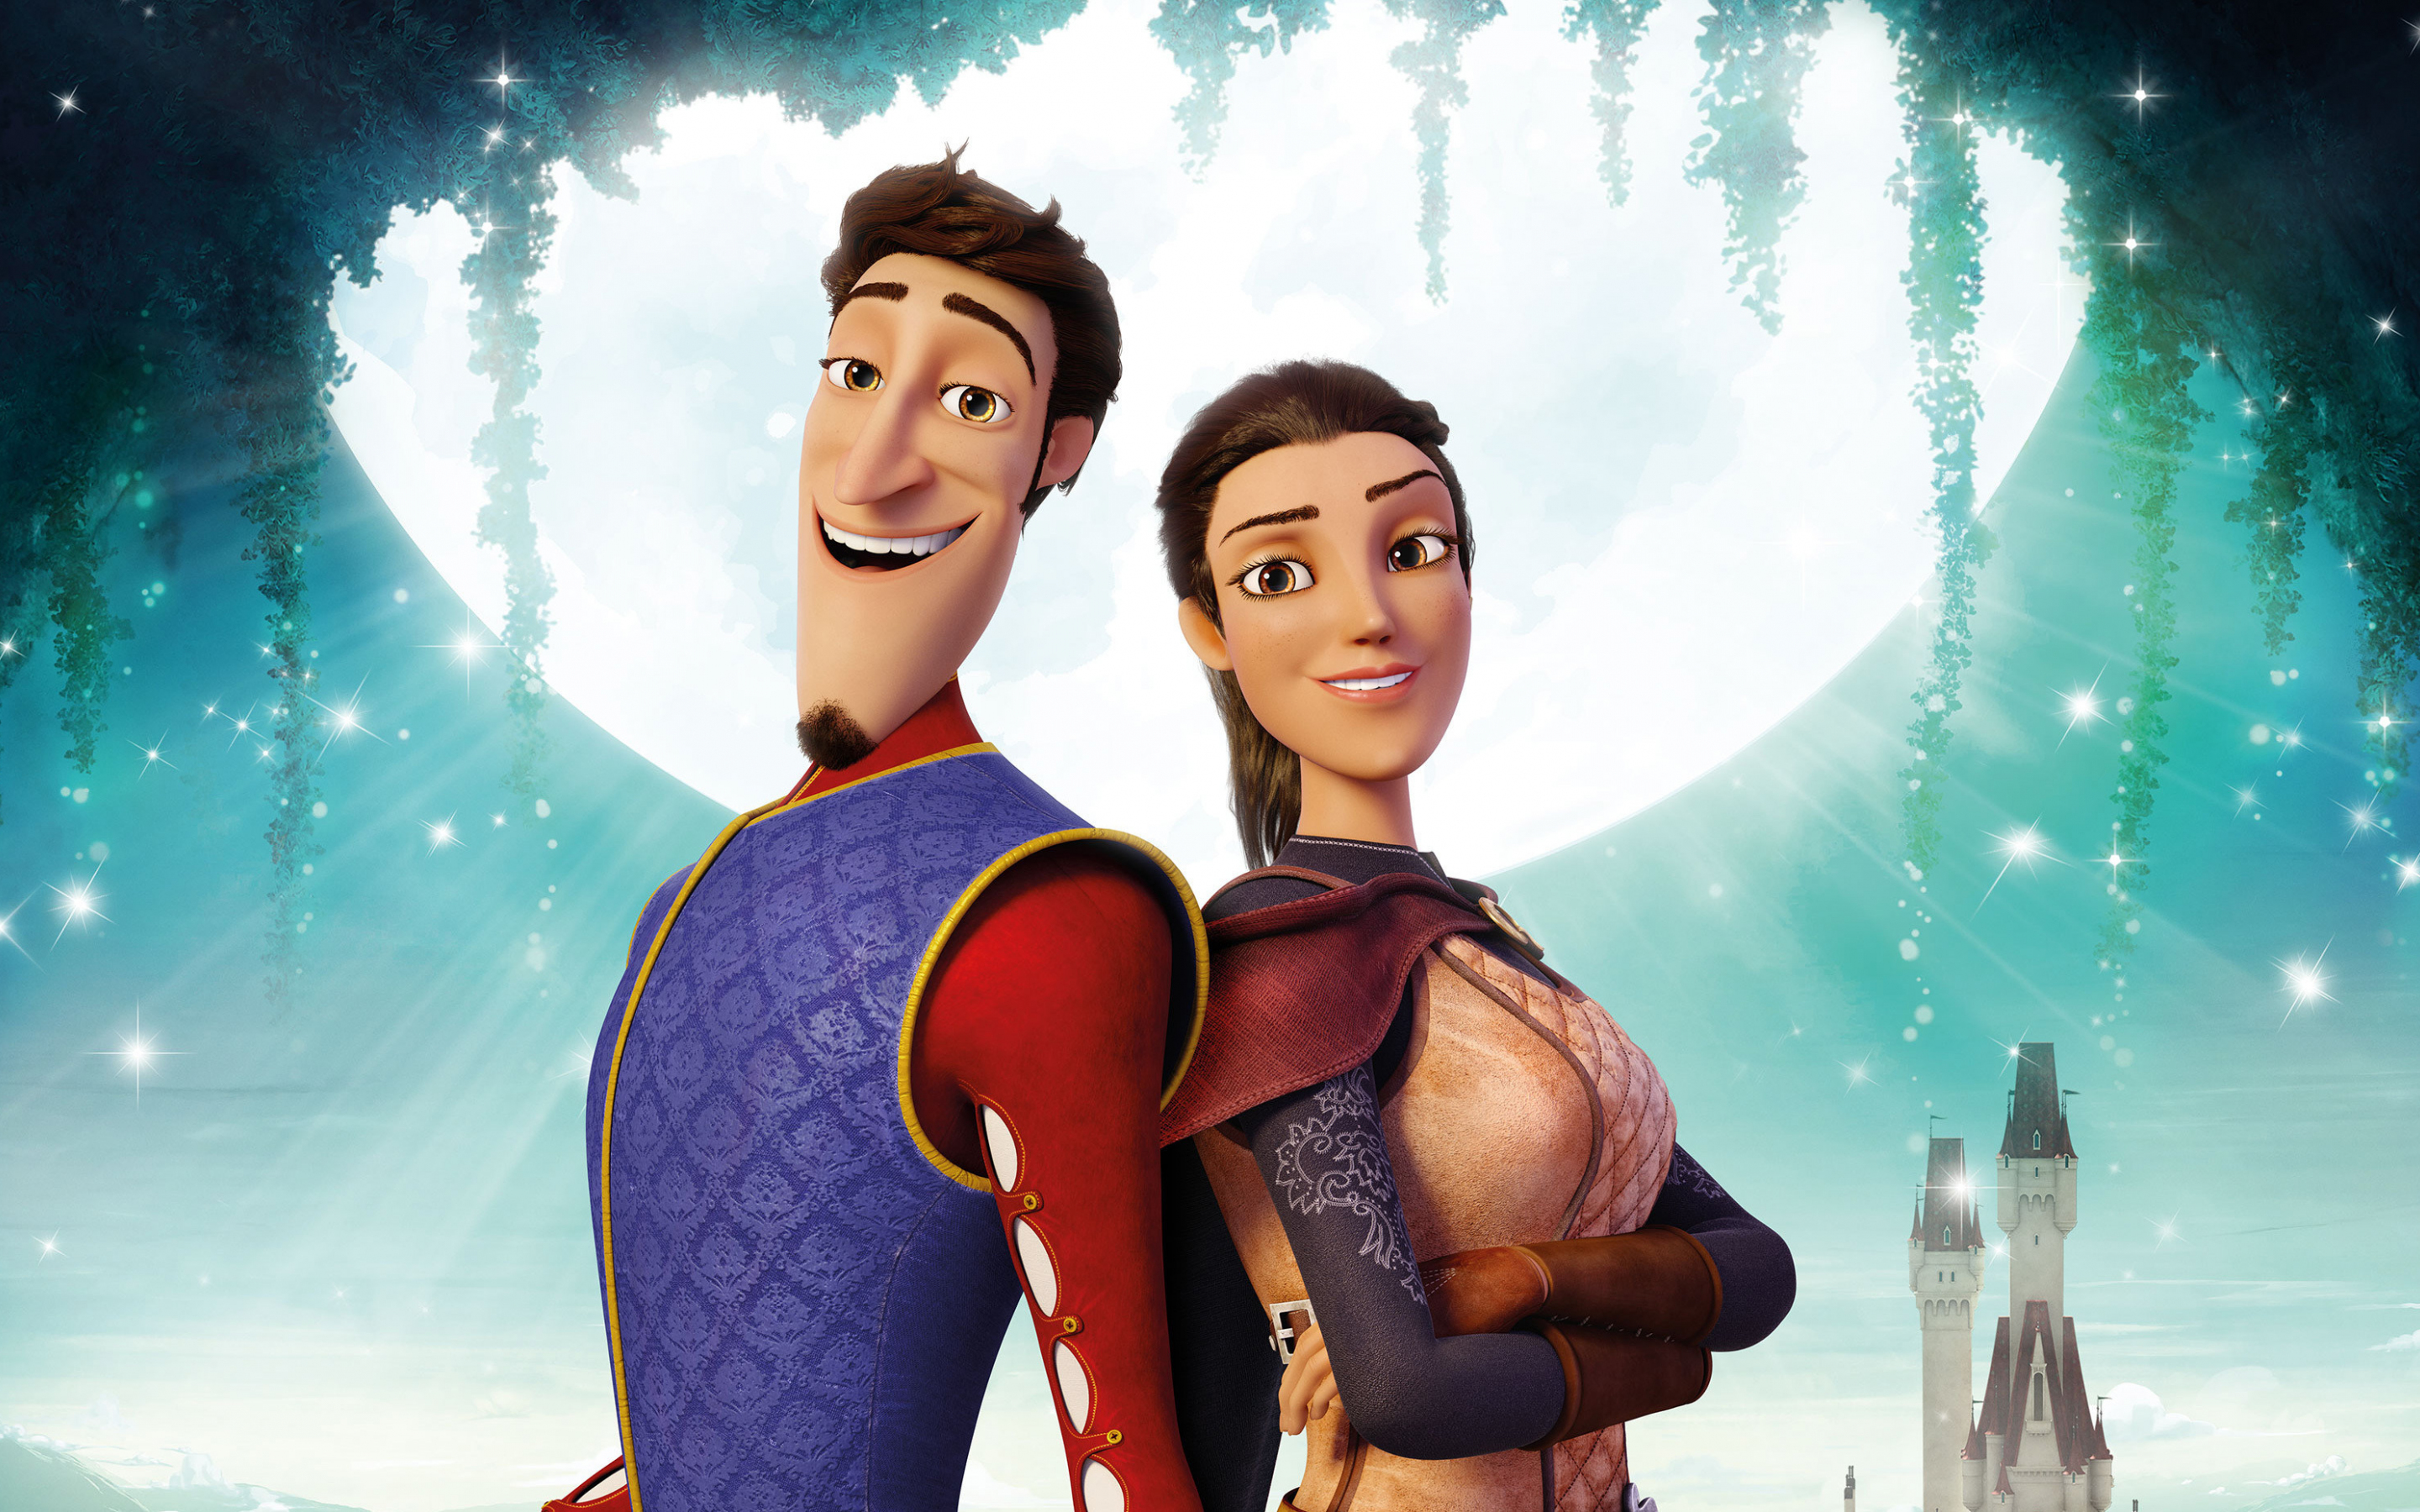 Charming, couple, animated movie, 2018, 2880x1800 wallpaper